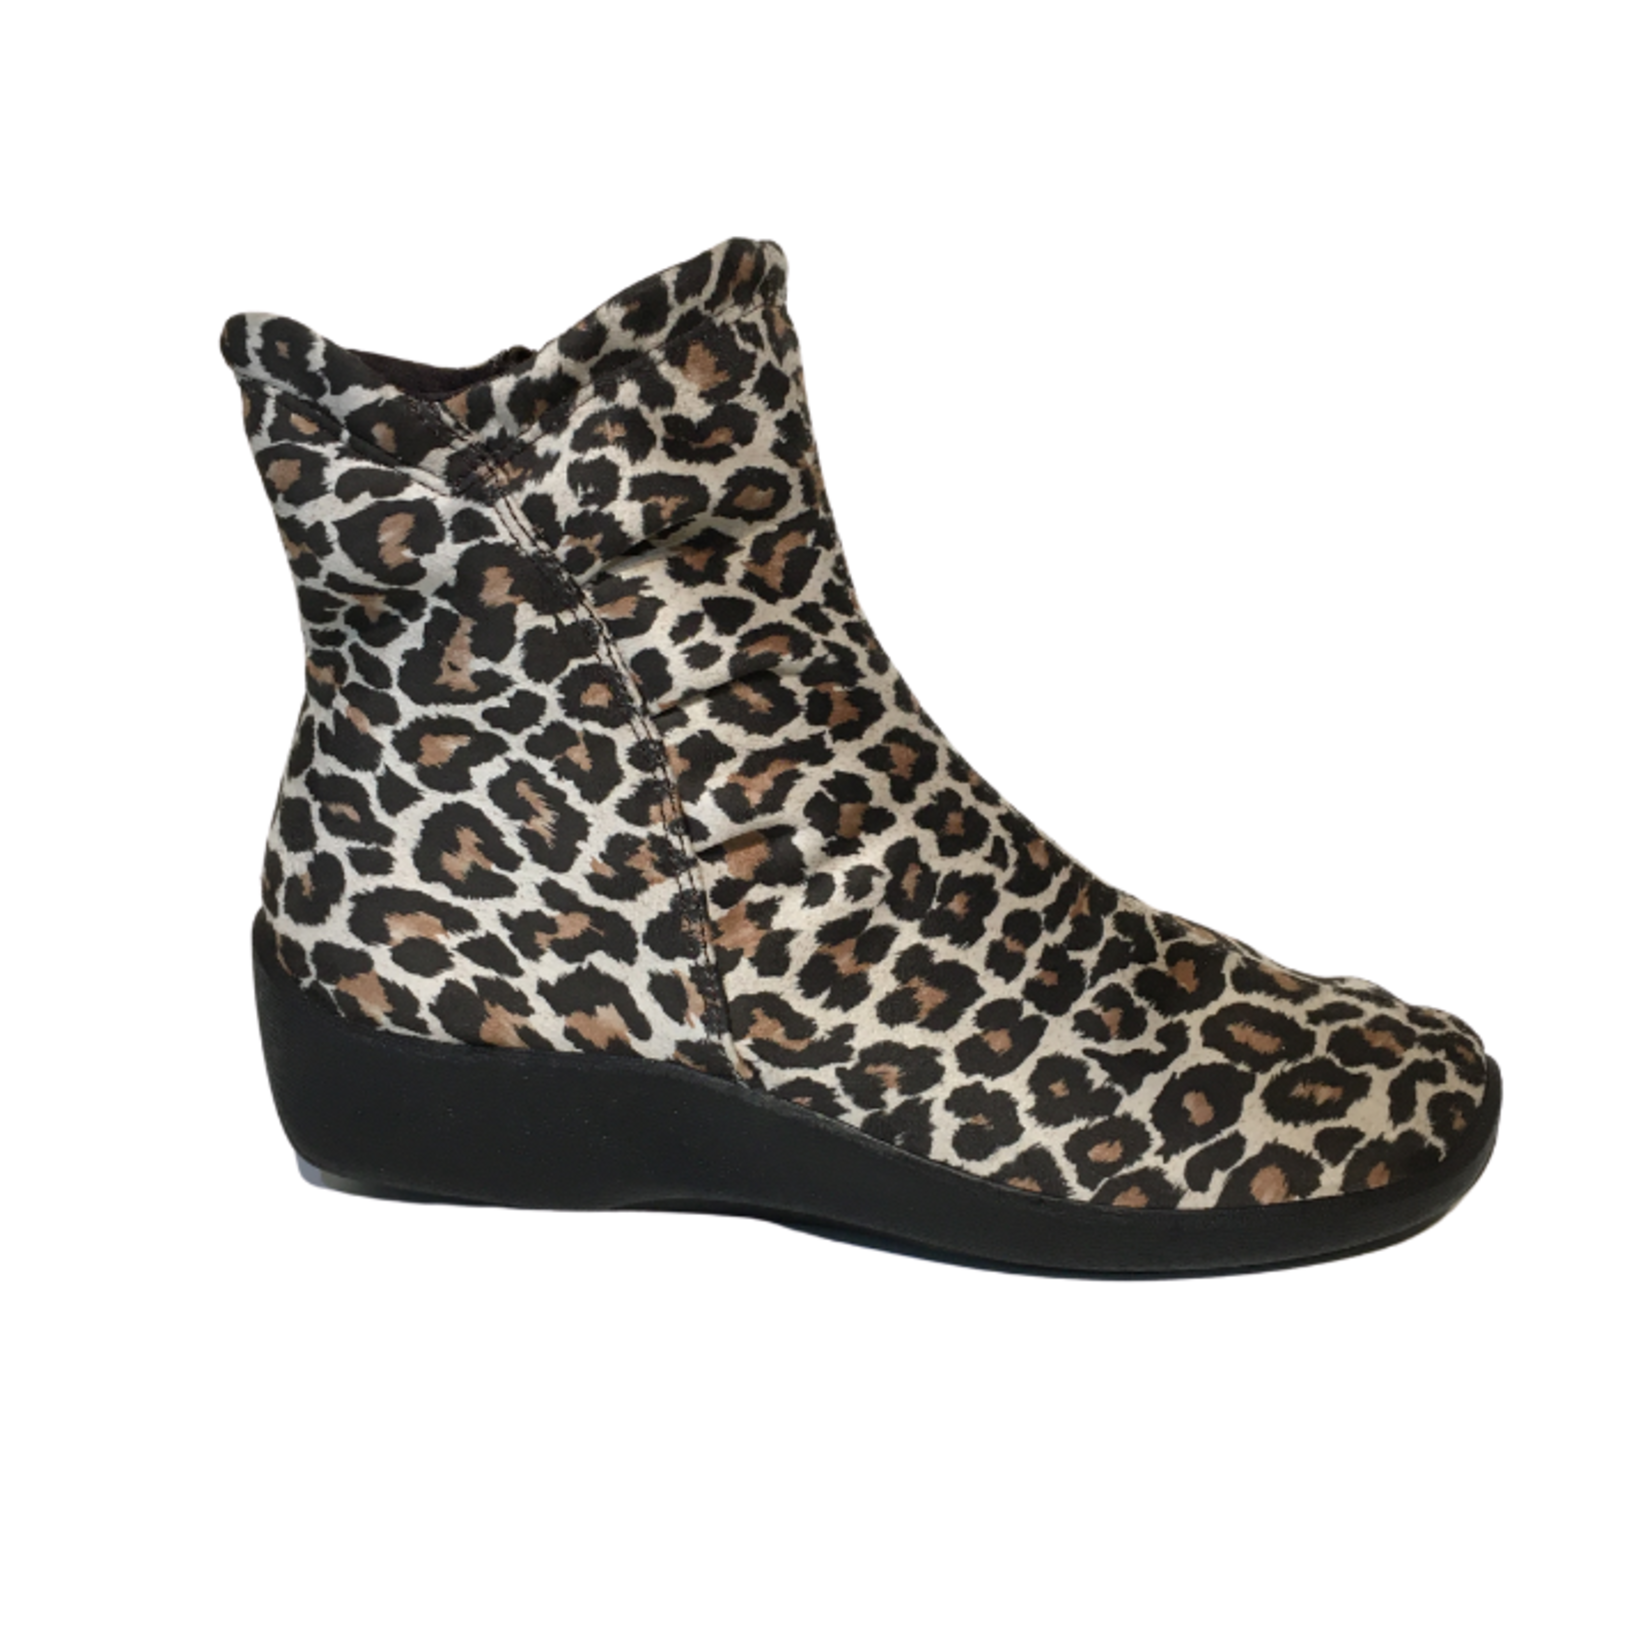 Arcopedico L19 LIMITED EDITION leopard only size 42